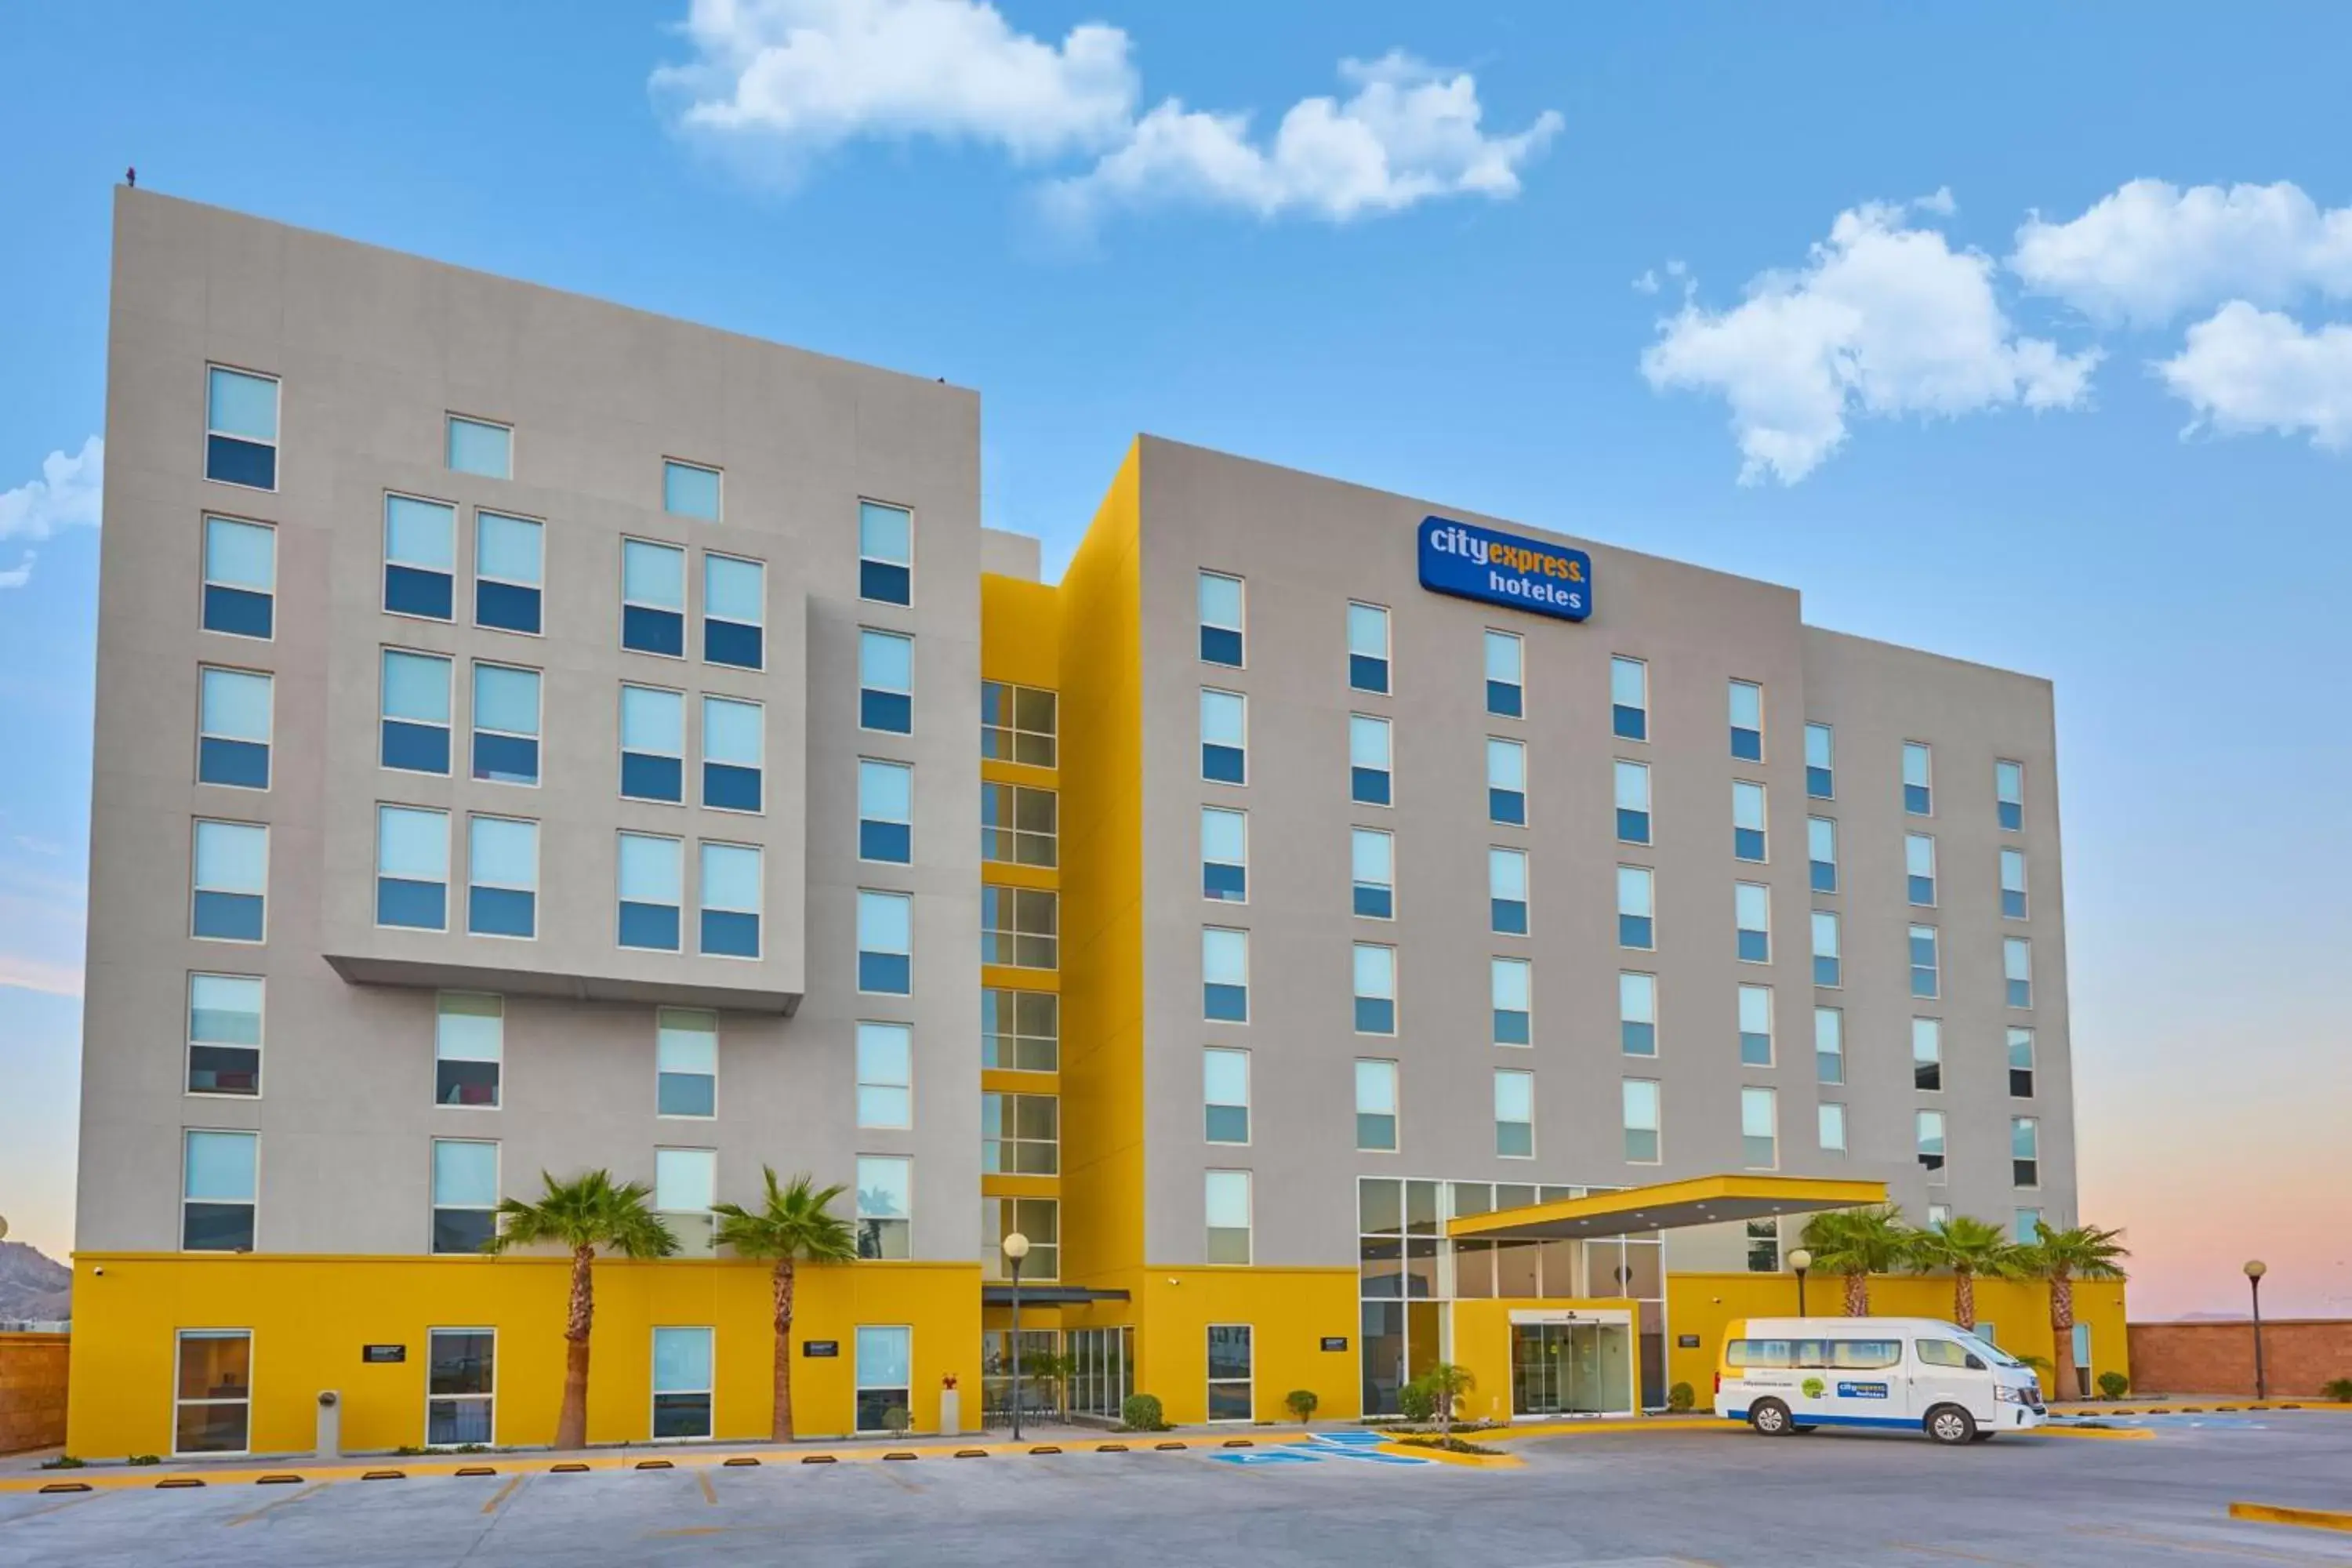 Property Building in City Express by Marriott Hermosillo Expo